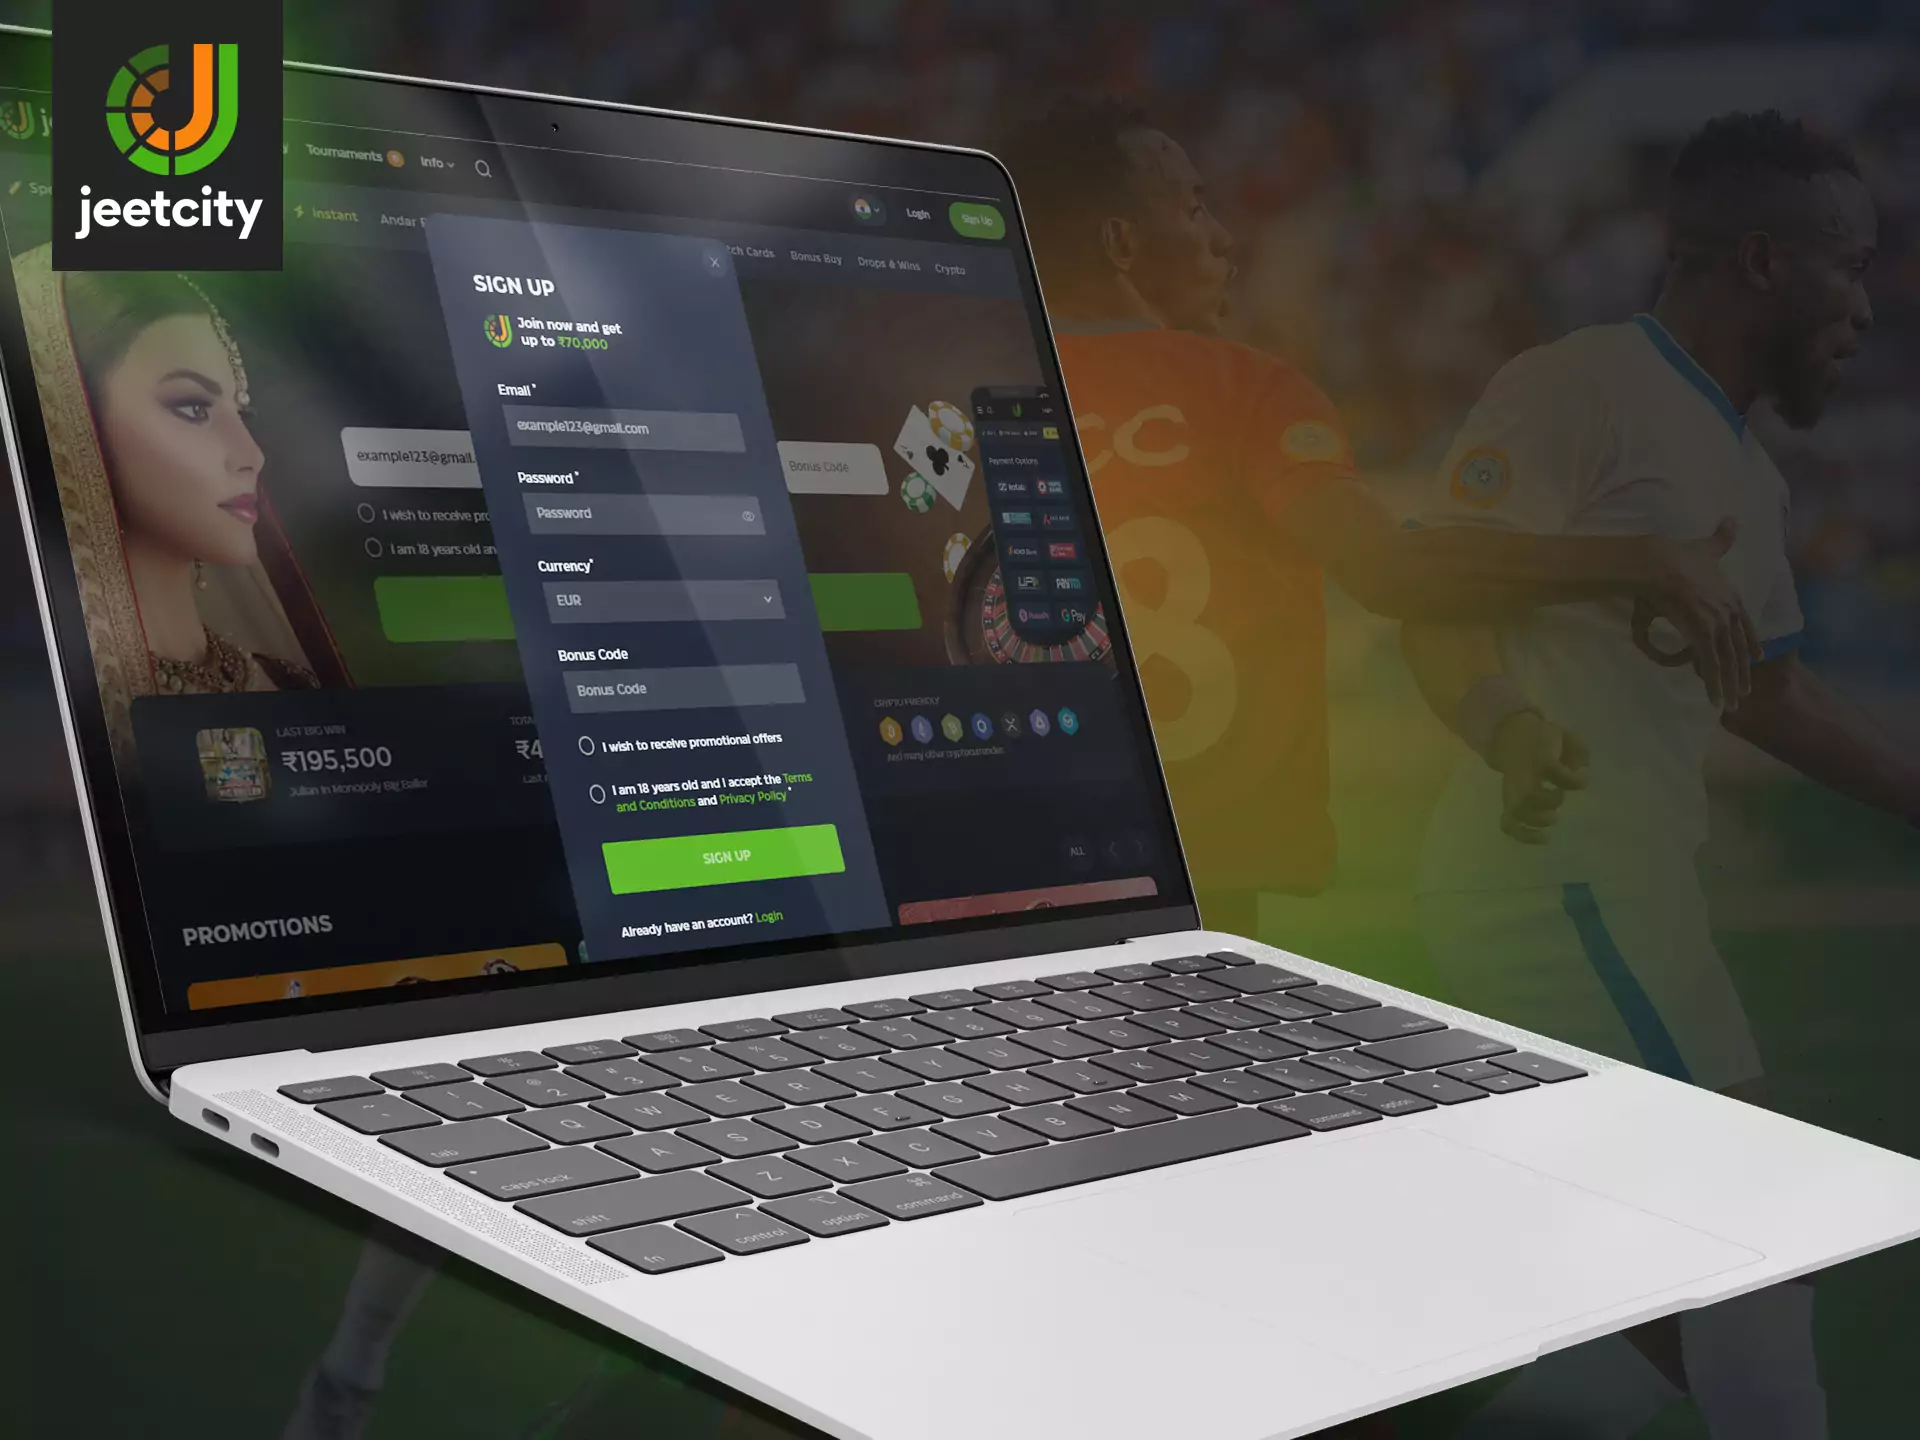 Go through a simple and quick JeetCity registration to make sports betting and play.